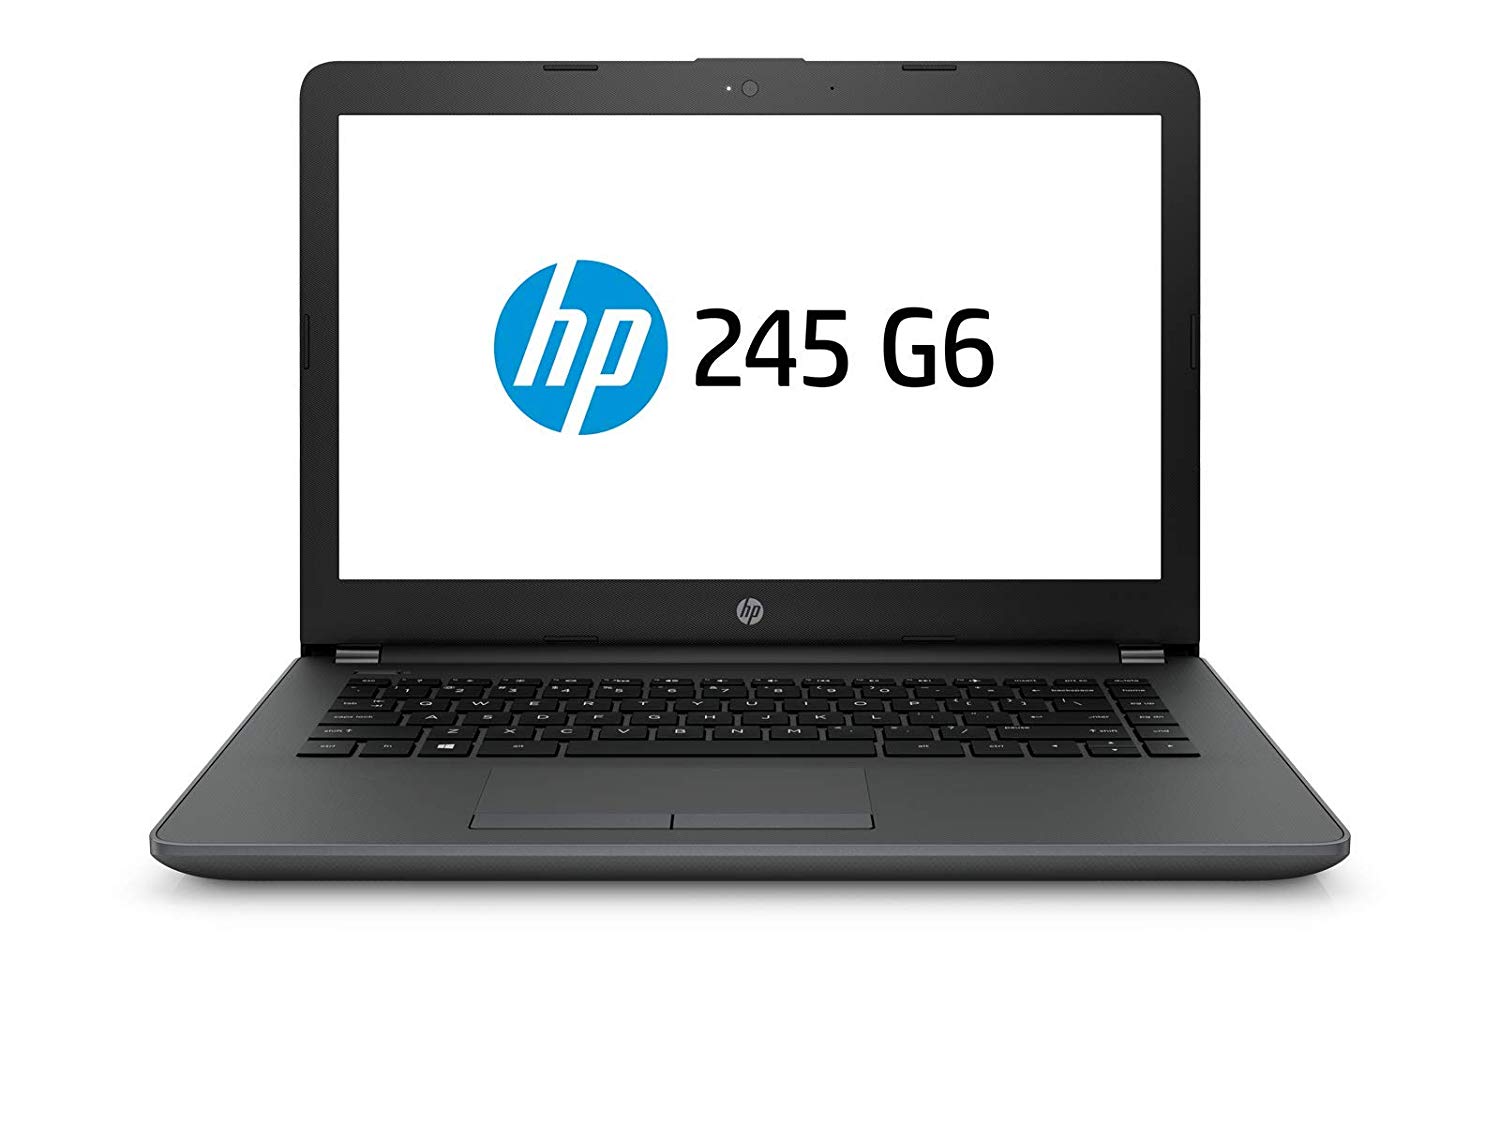 HP Laptop Price List with Full Specification - HP Business ...